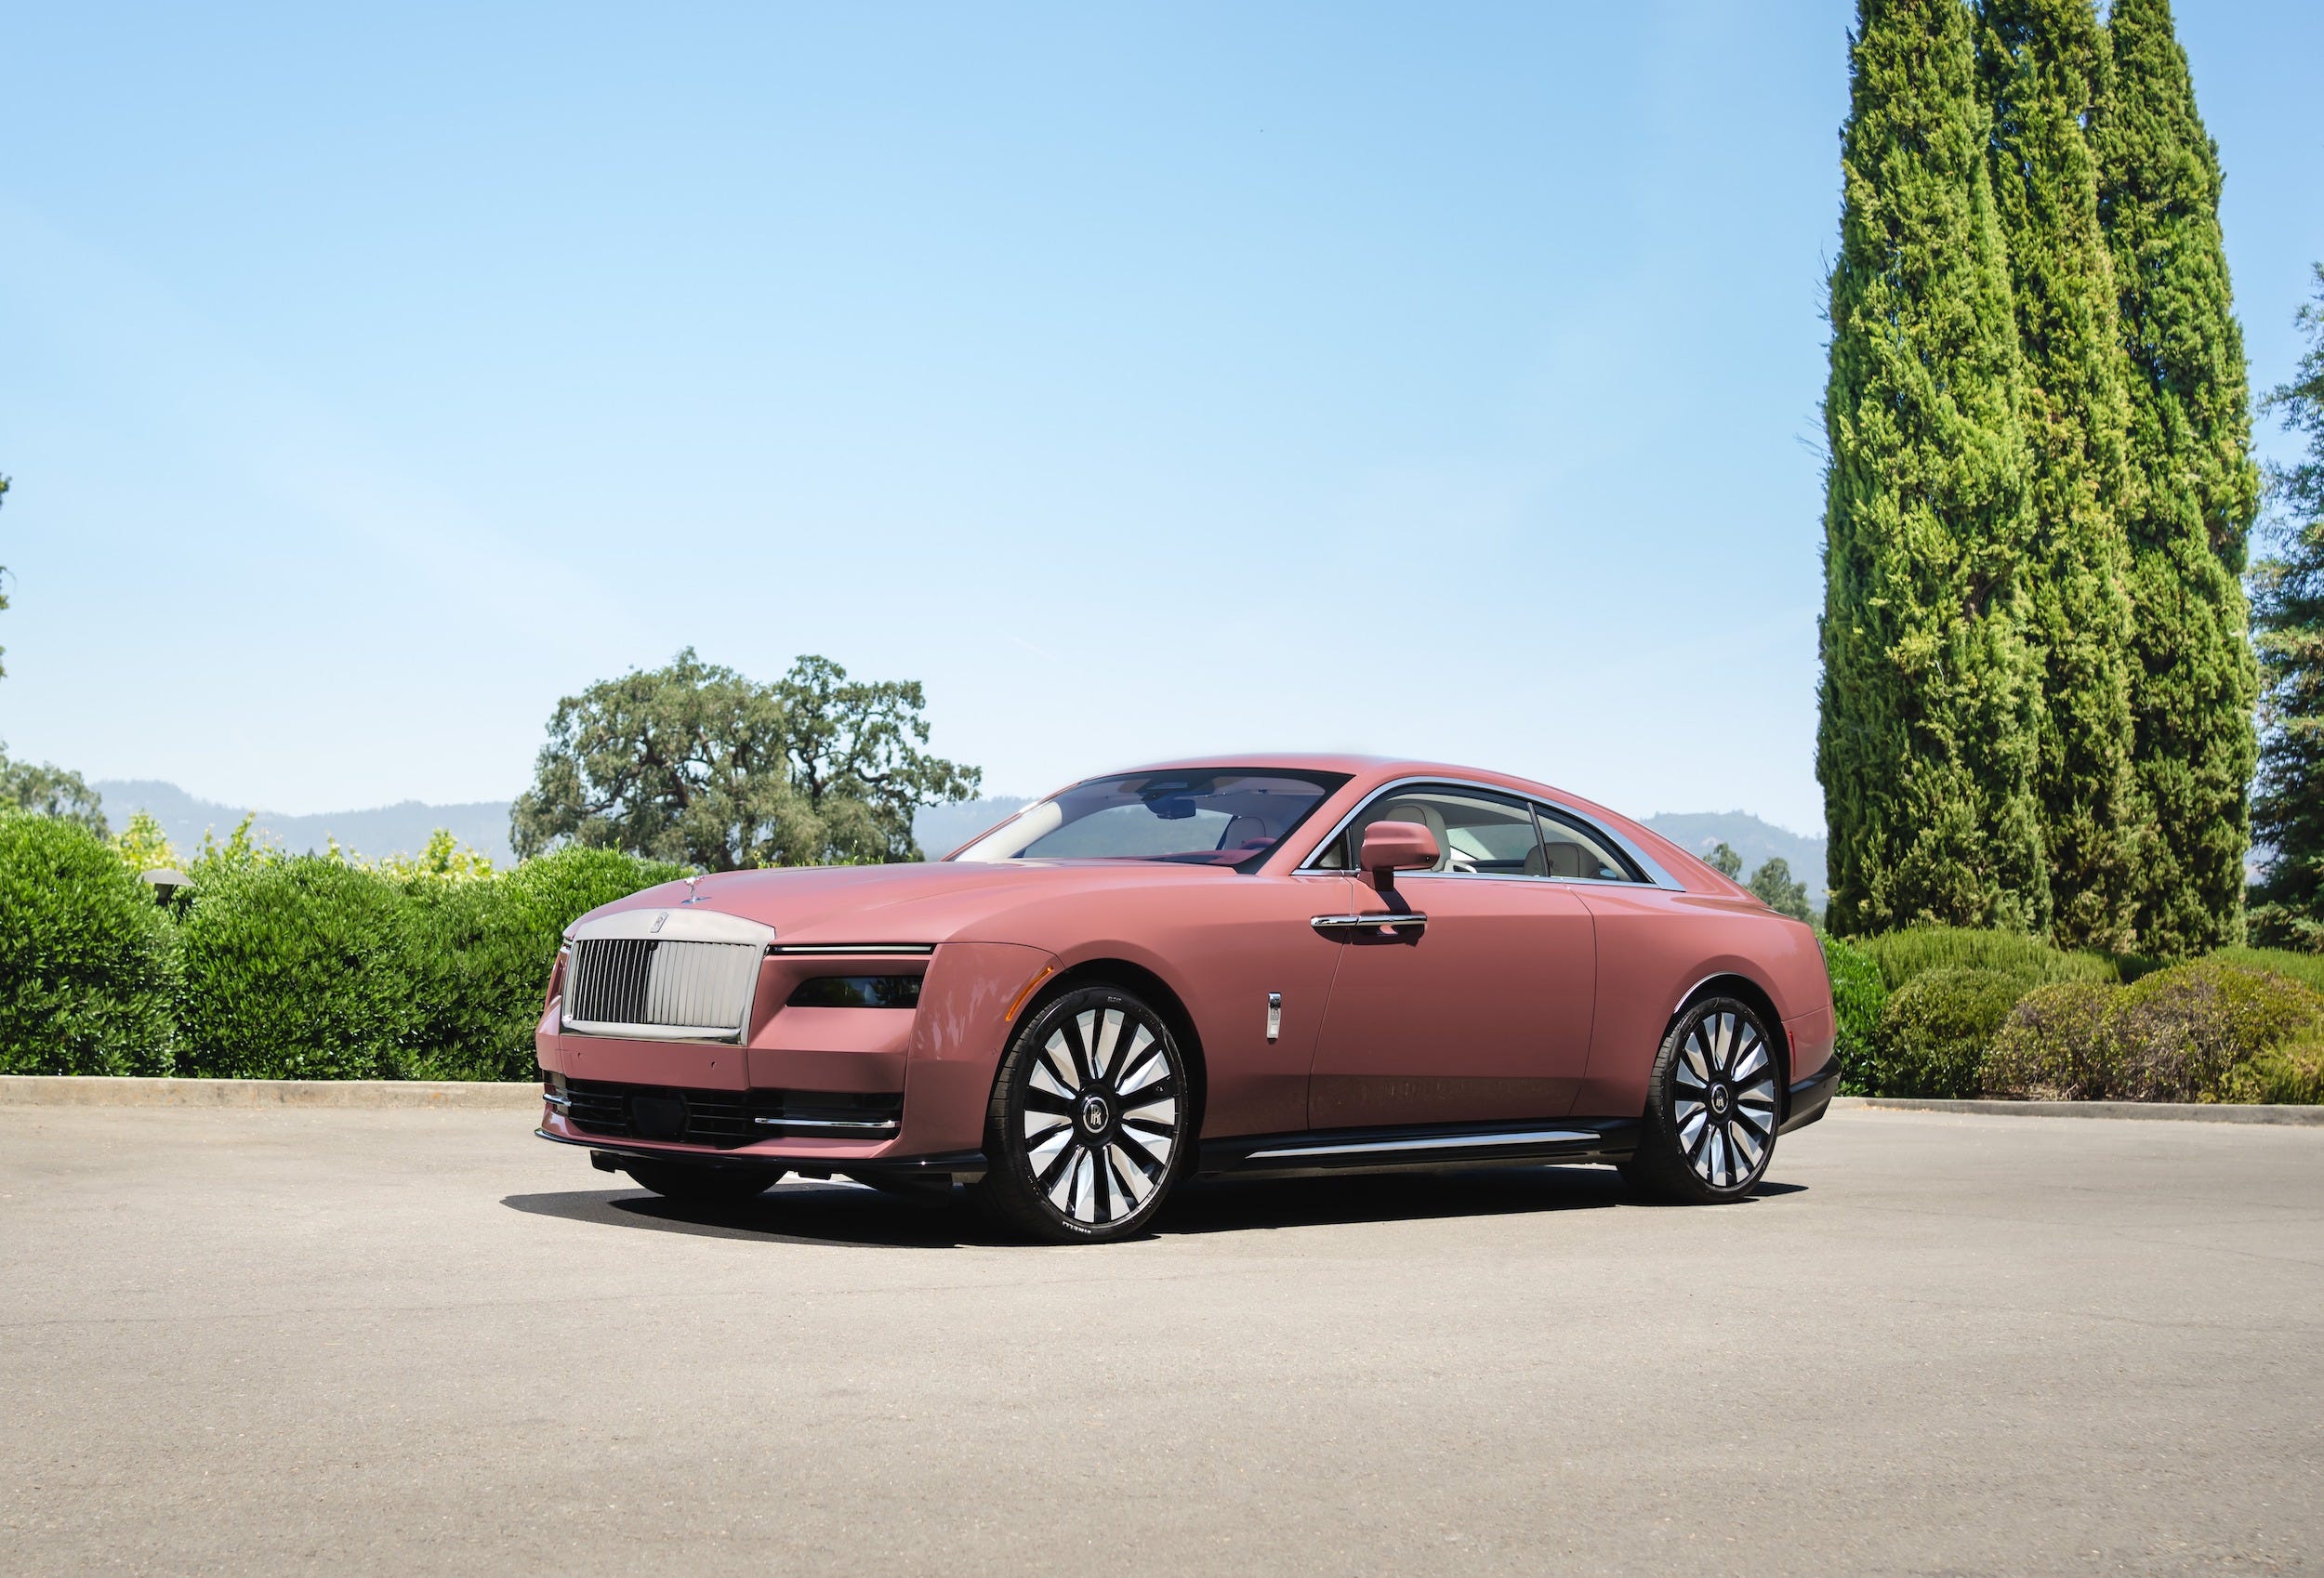 A pink Rolls-Royce Spectre in a parking lot, with blue skies and trees in the background.